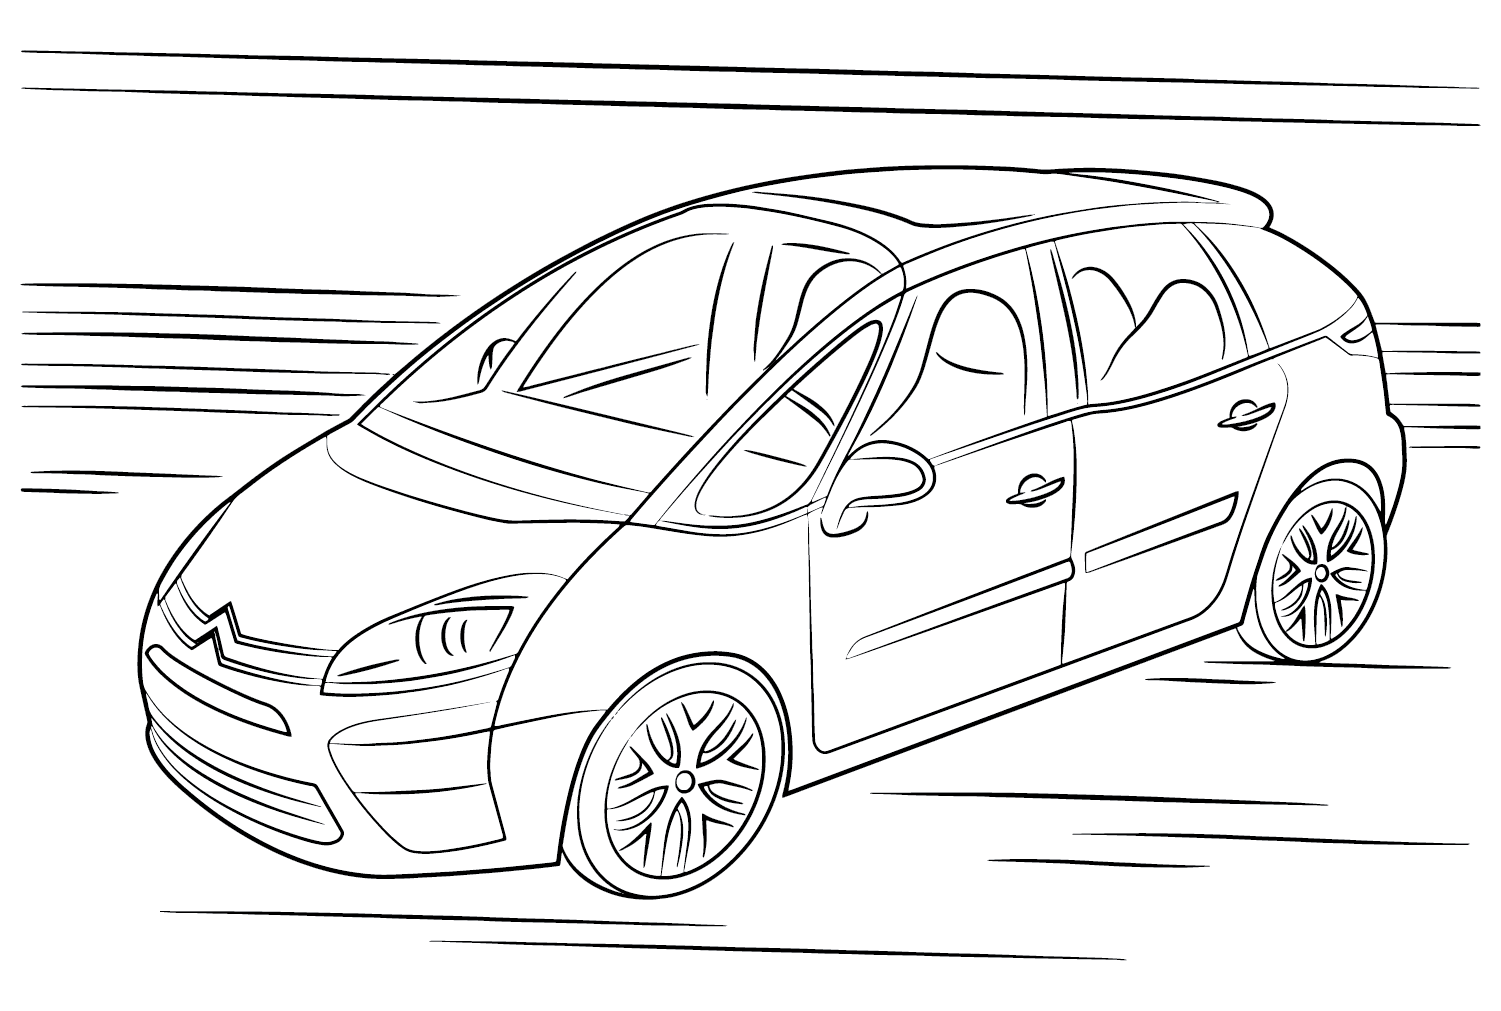 Citroën C4 Picasso Coloring Page from Citroën